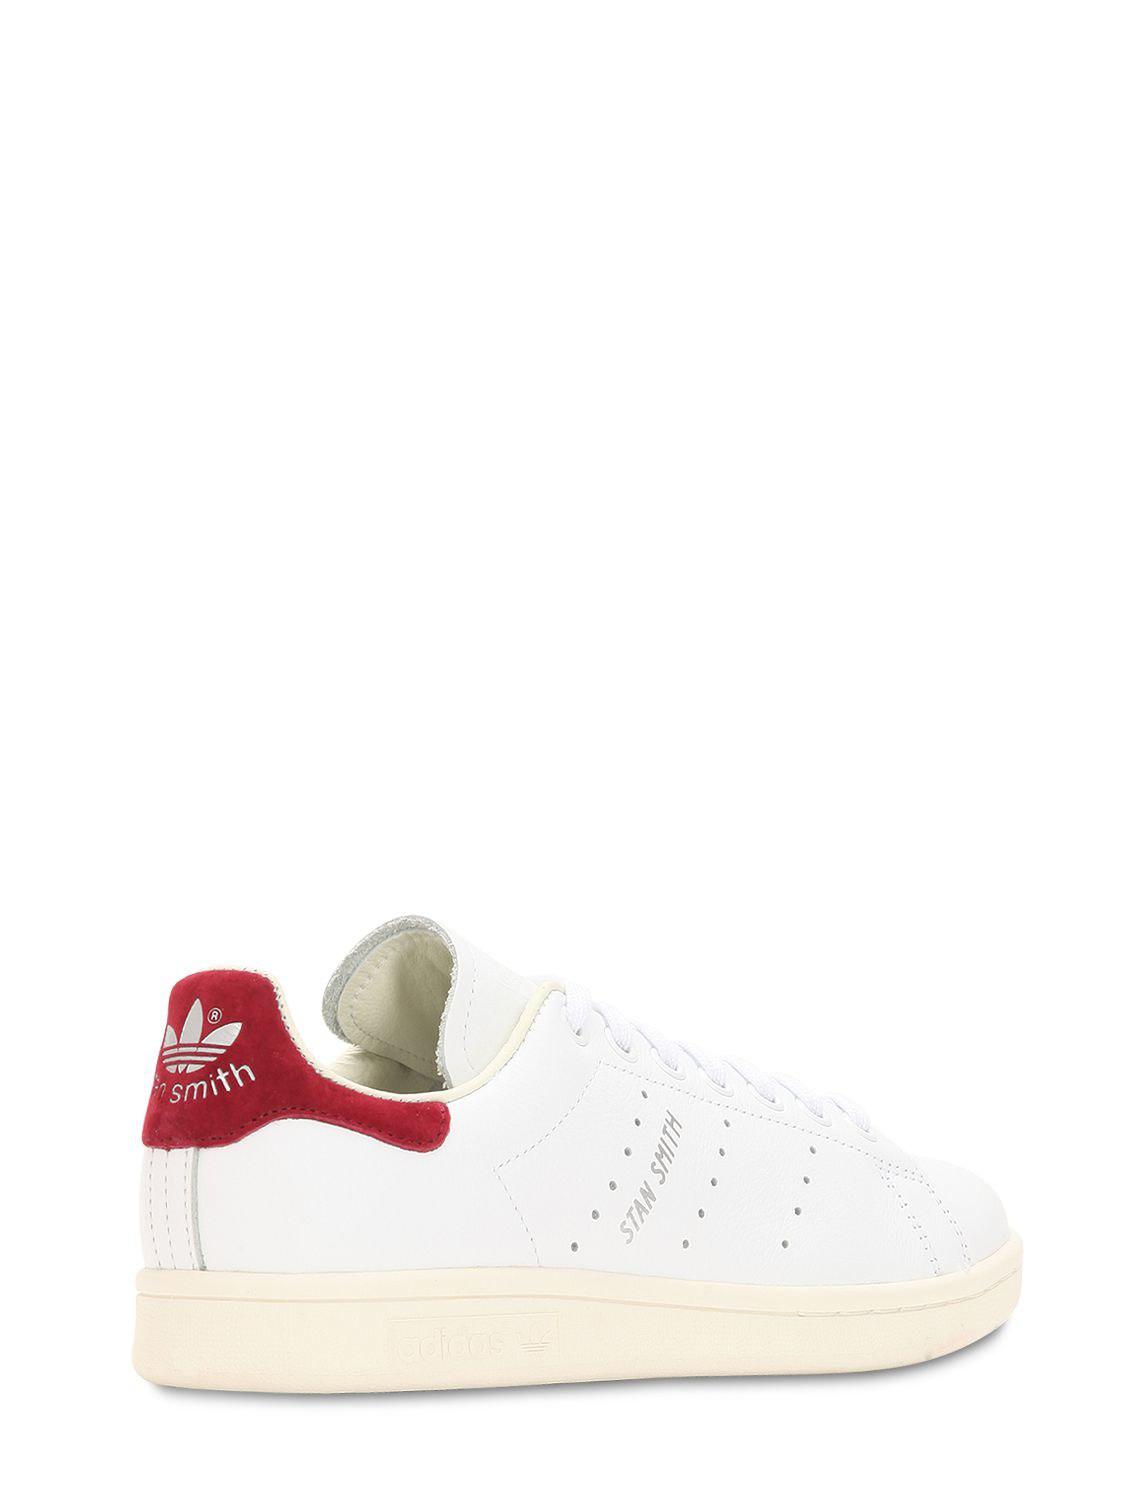 adidas Originals Stan Smith Leather Sneakers in White/Bordeaux (White) -  Lyst